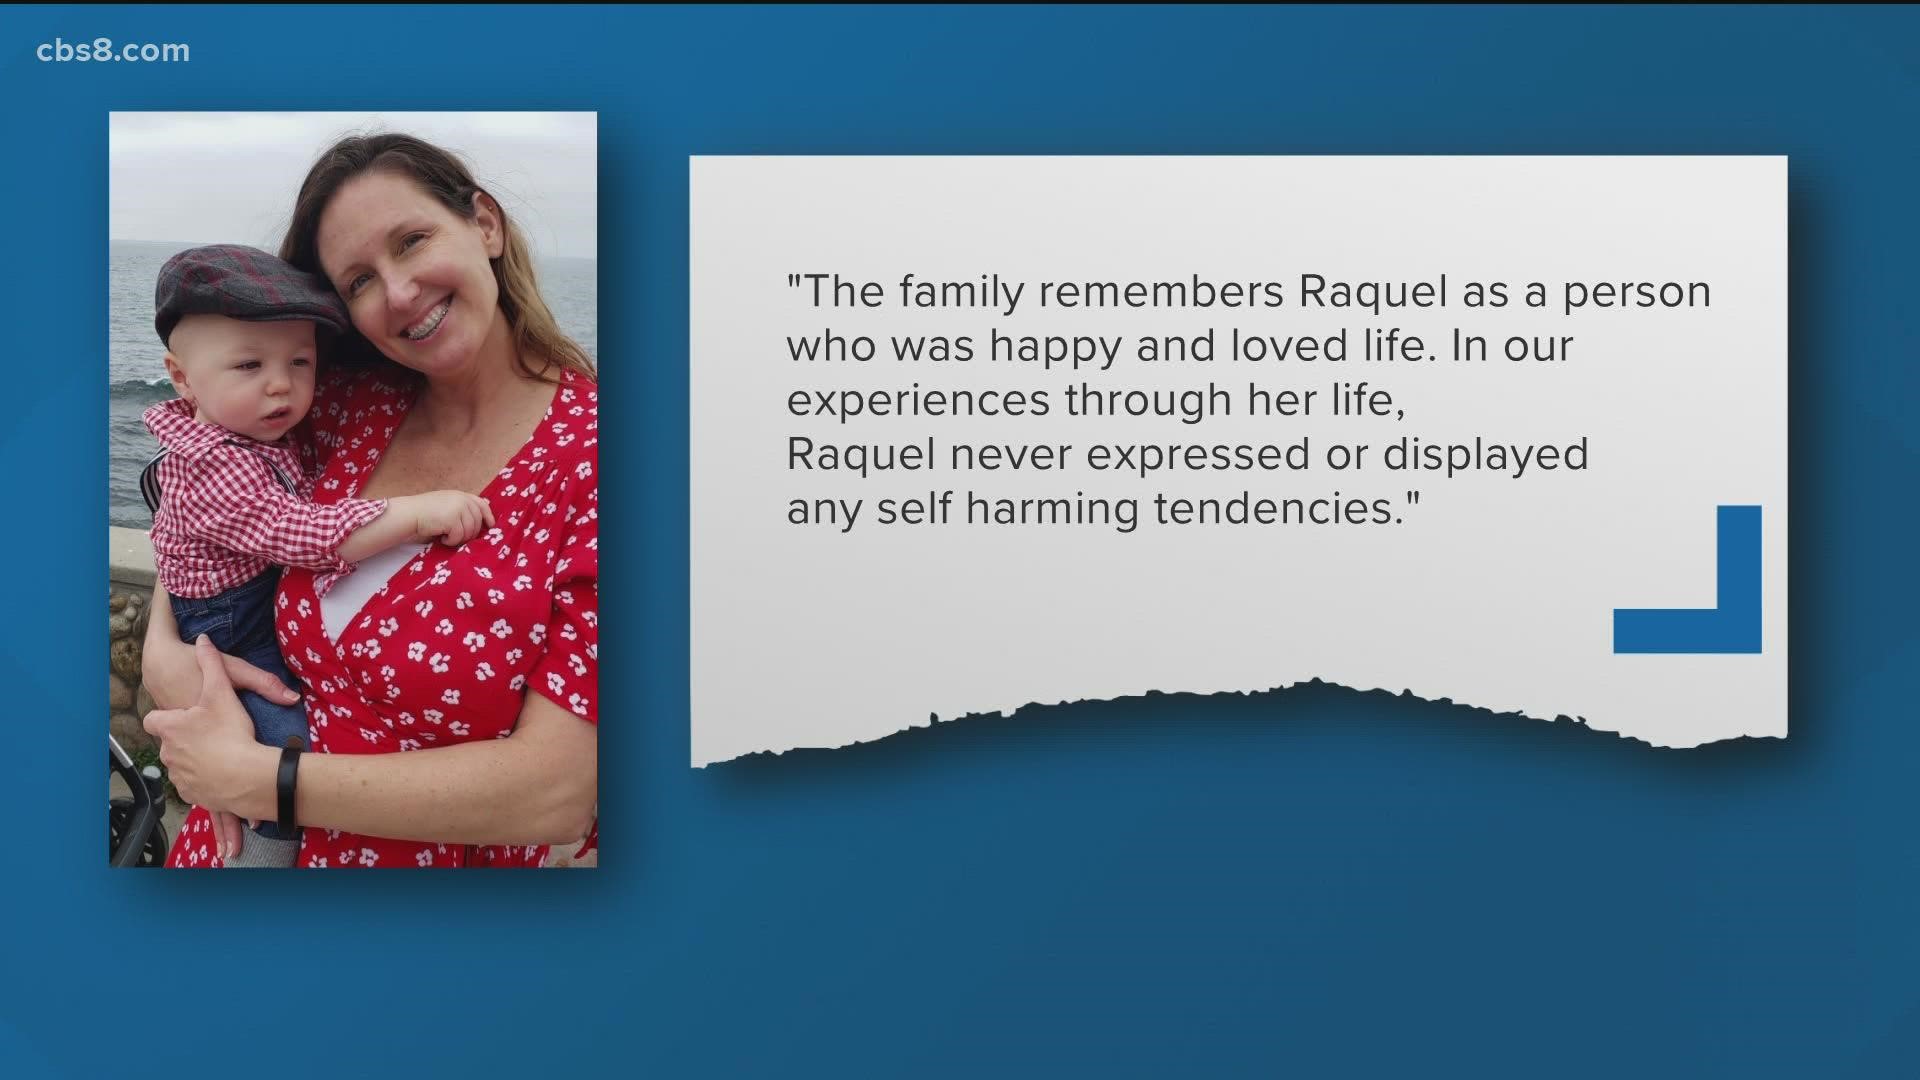 A restraining order filed in 2016 alleged Raquel Wilkins had a history of suicidal behavior.